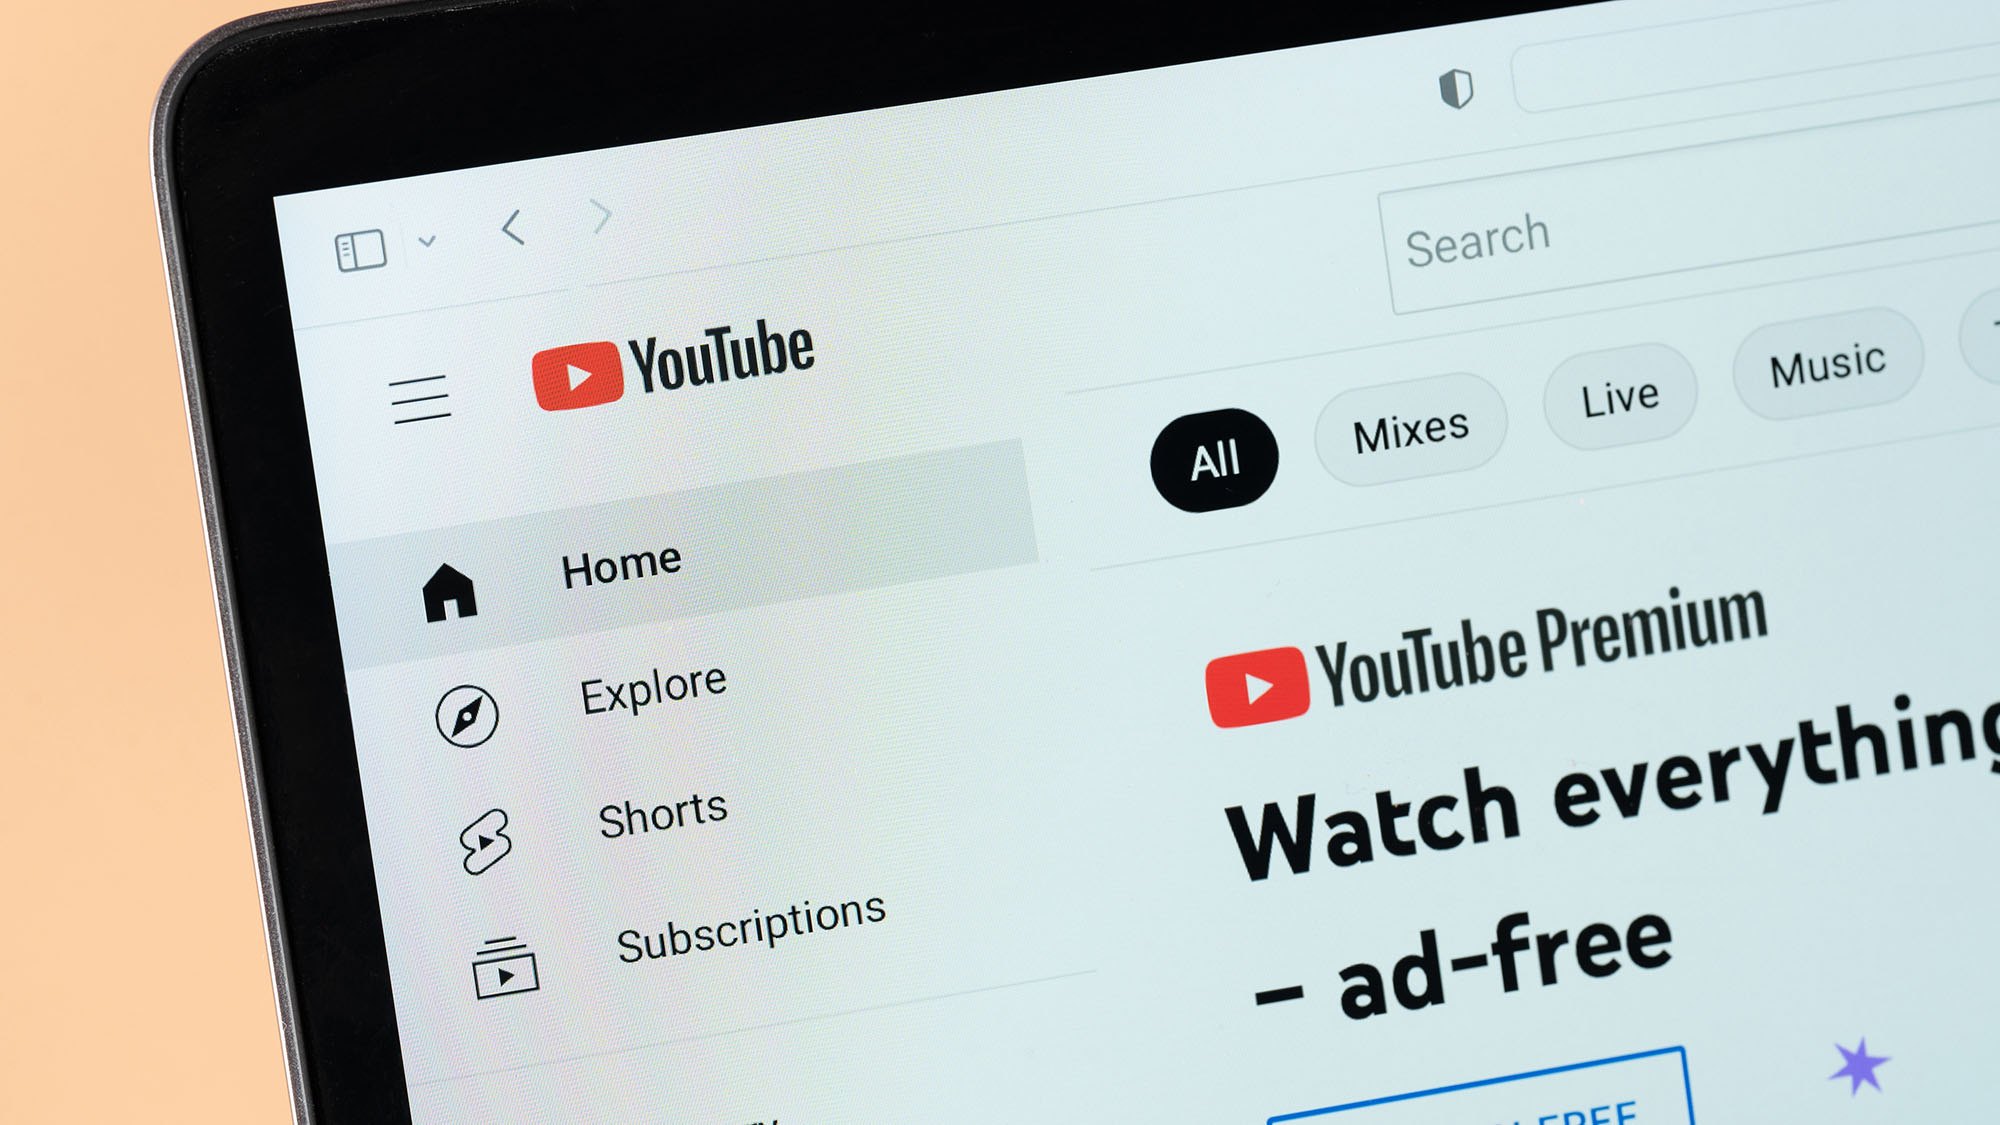 youtube-premium-subscribers-just-got-access-to-5-new-features